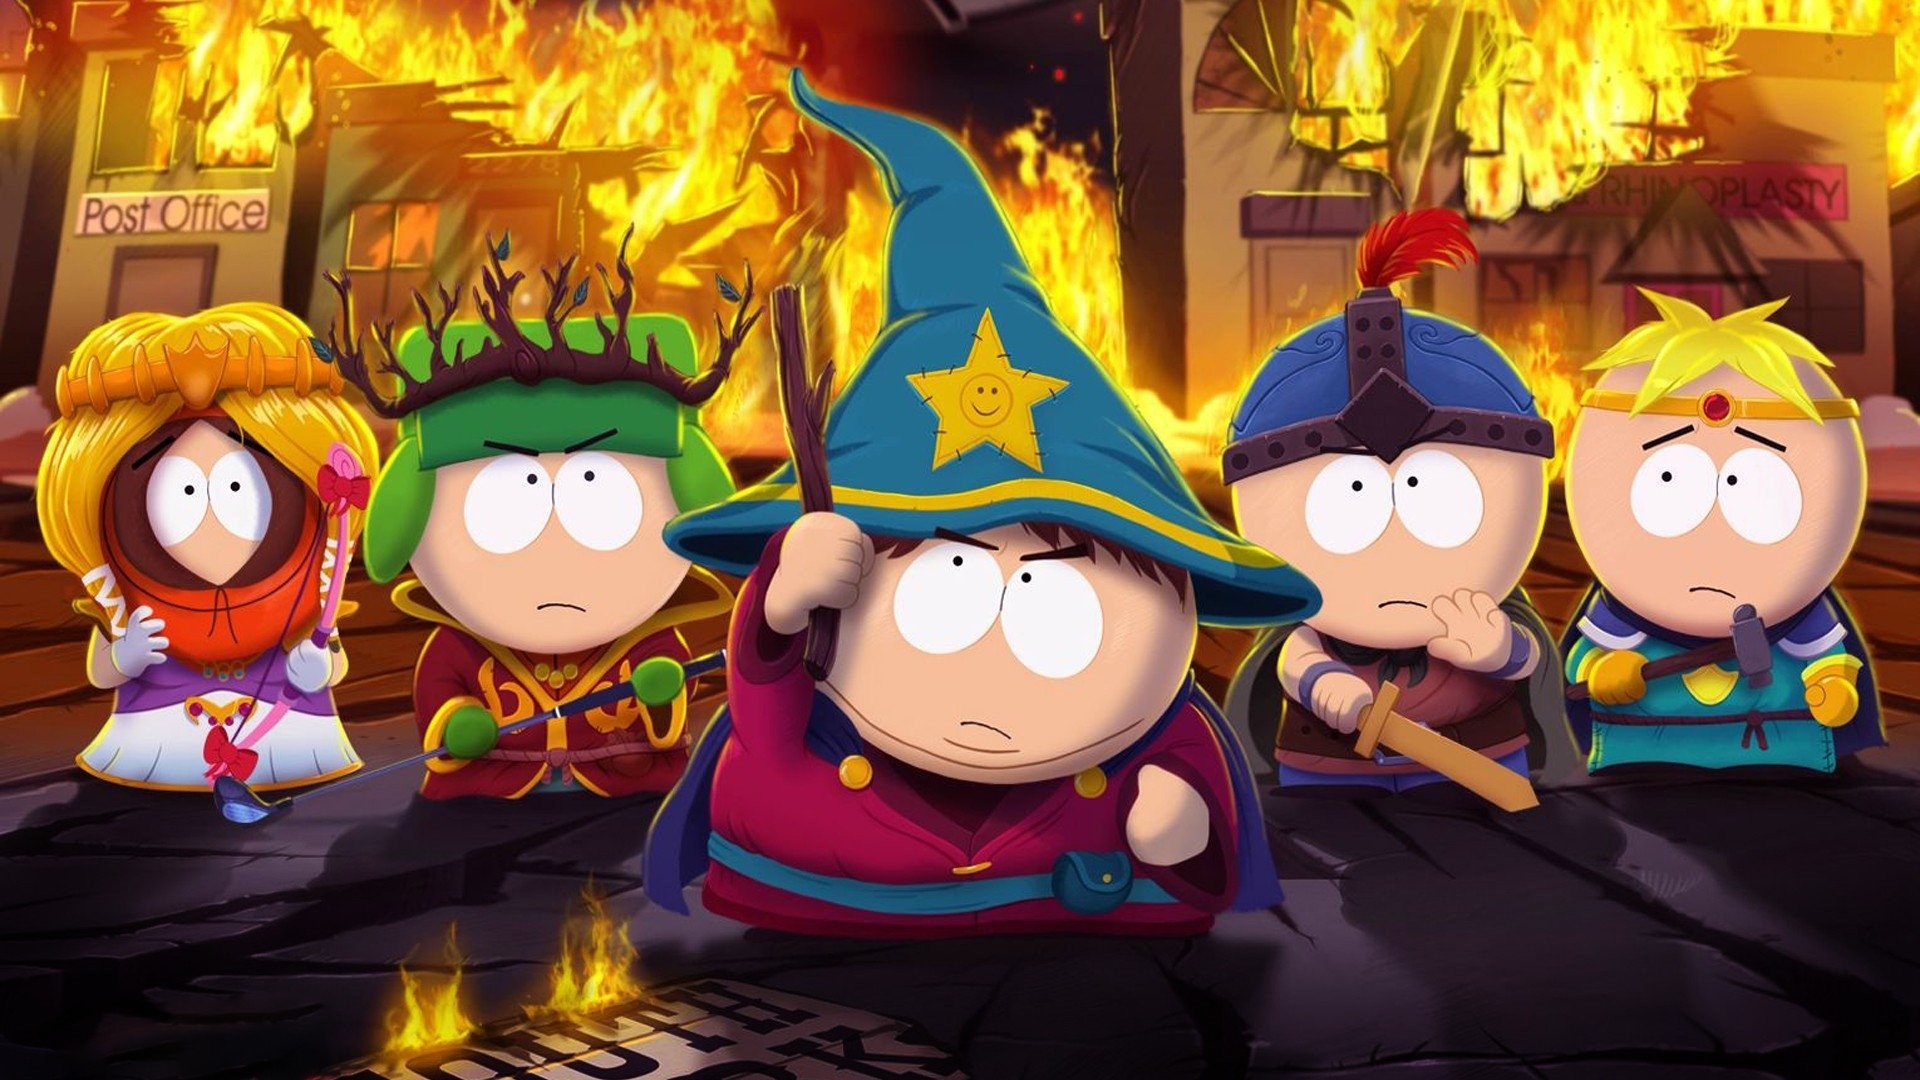 1920x1080 Video Game - South Park: The Stick of Truth Wallpaper